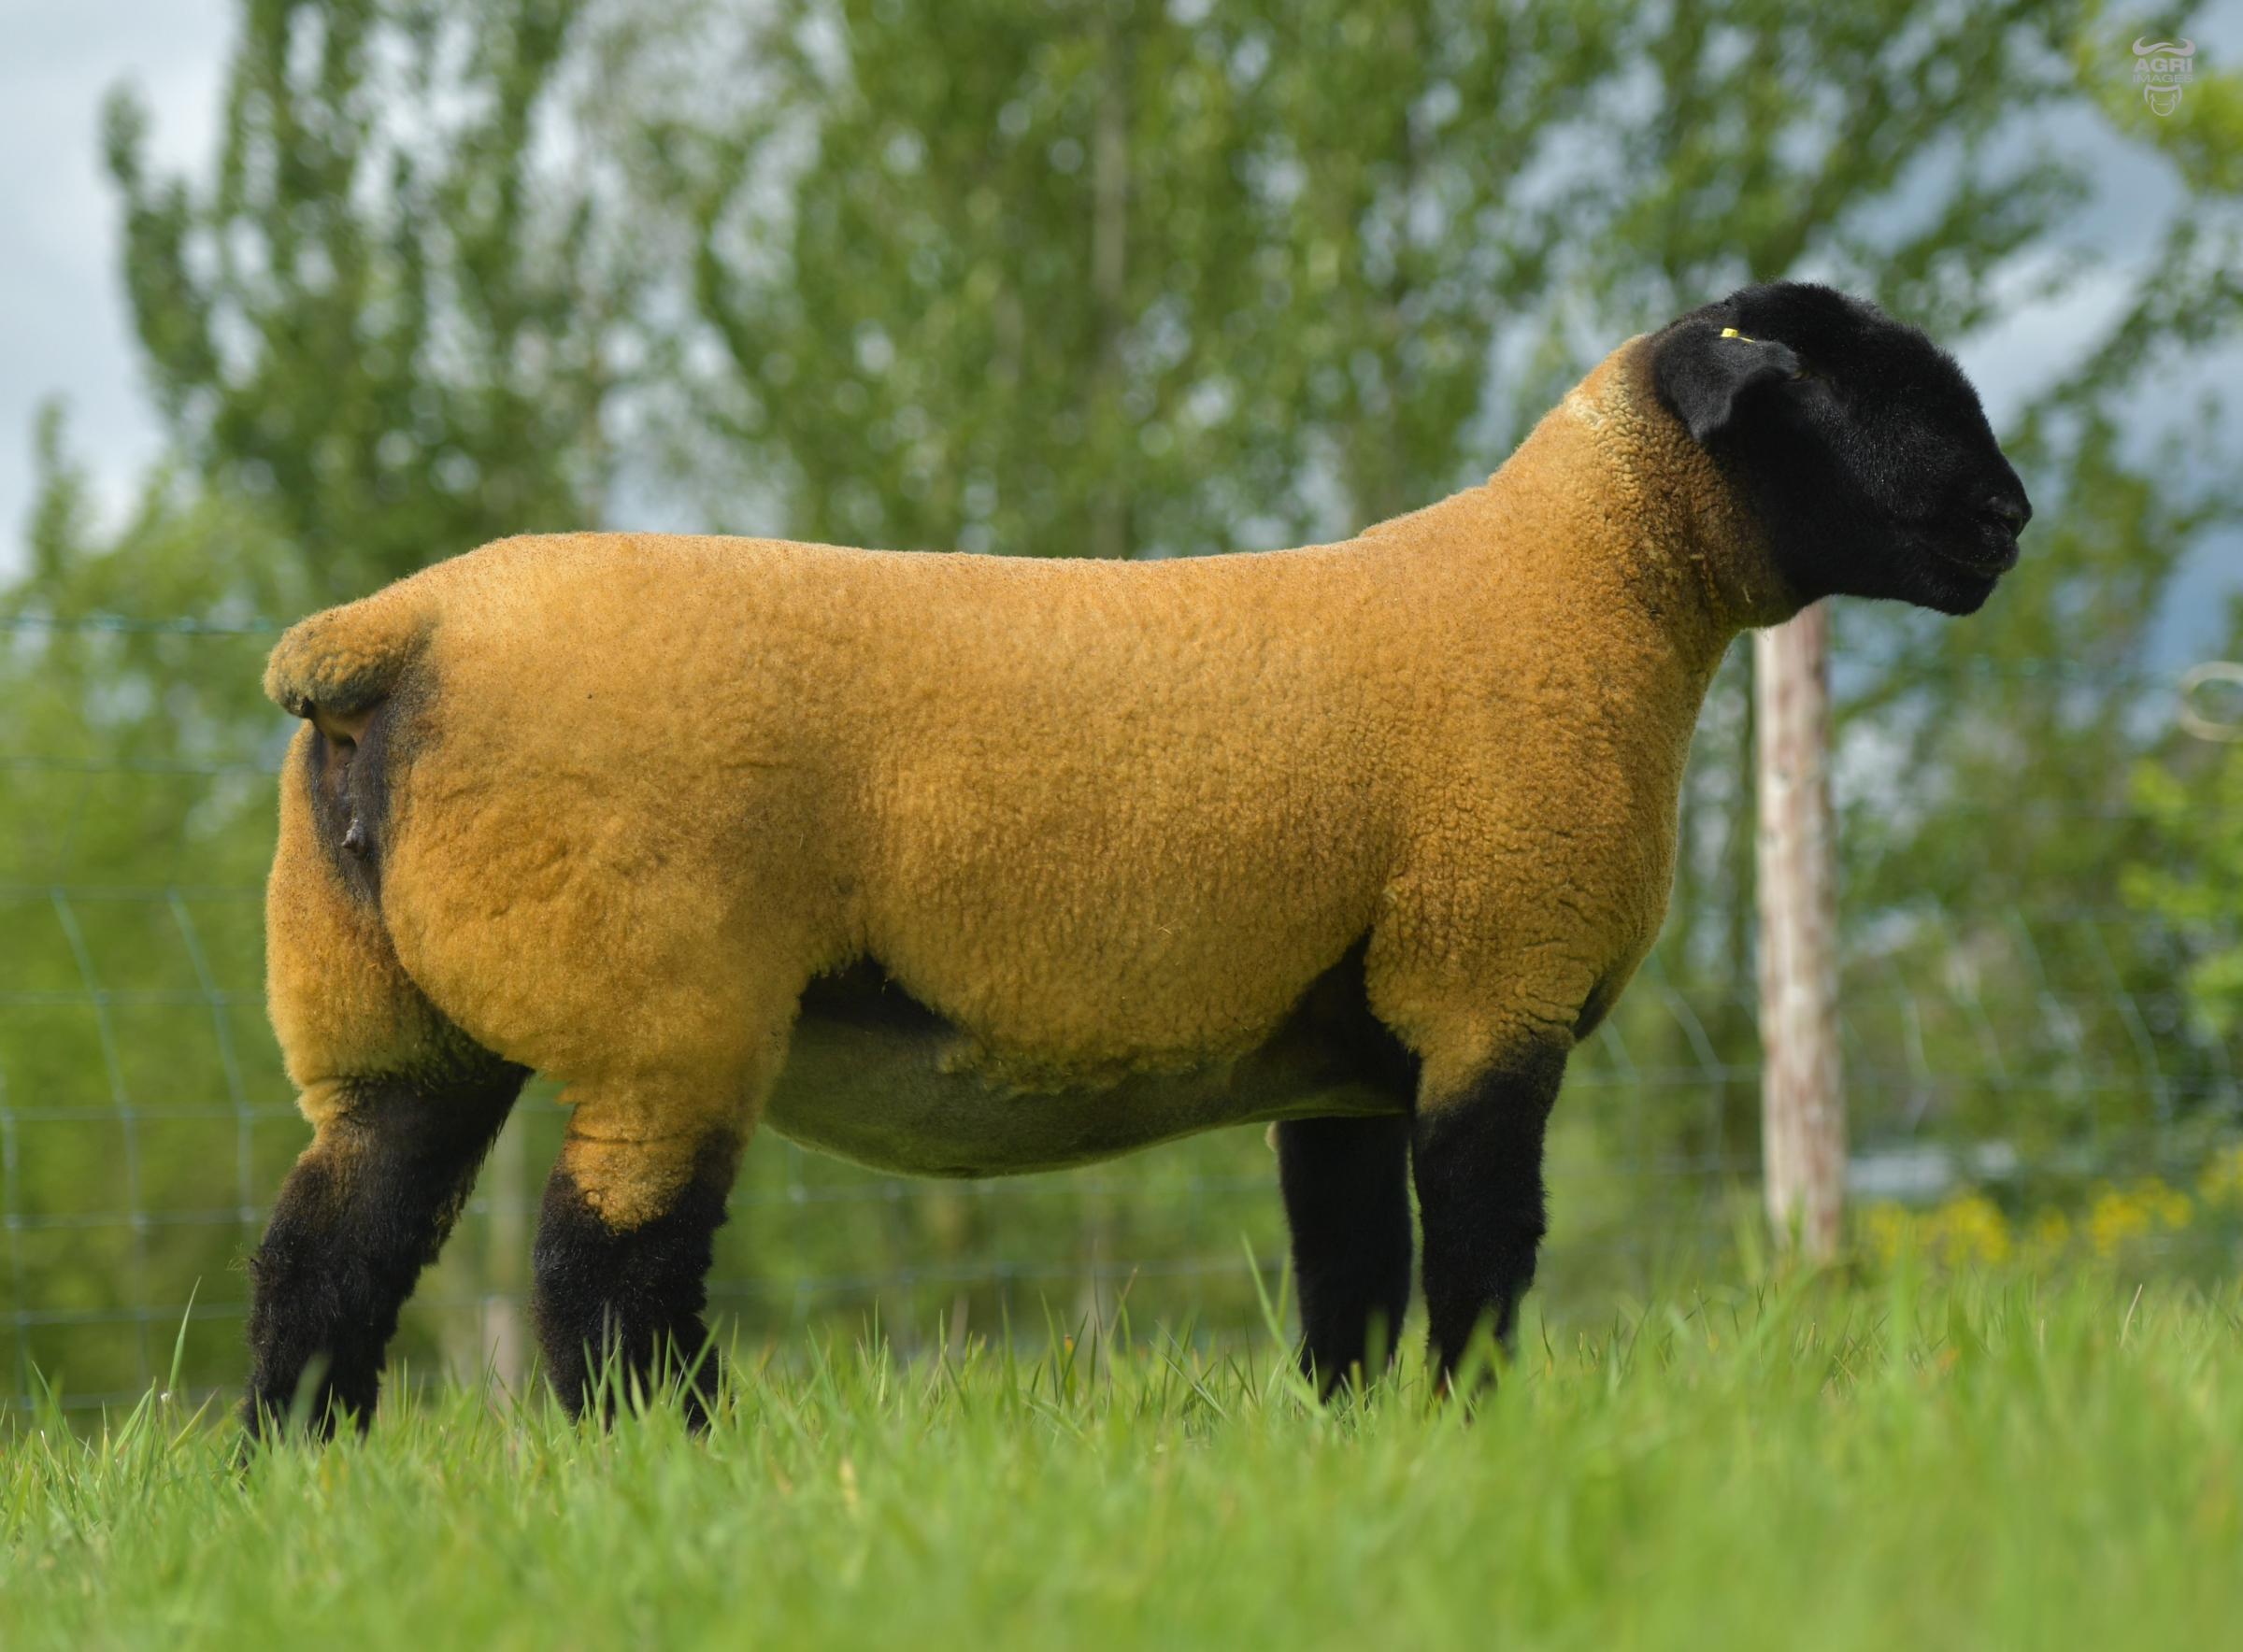 Top priced Suffolk at £5300 from Mark Priestleys Limestone flock